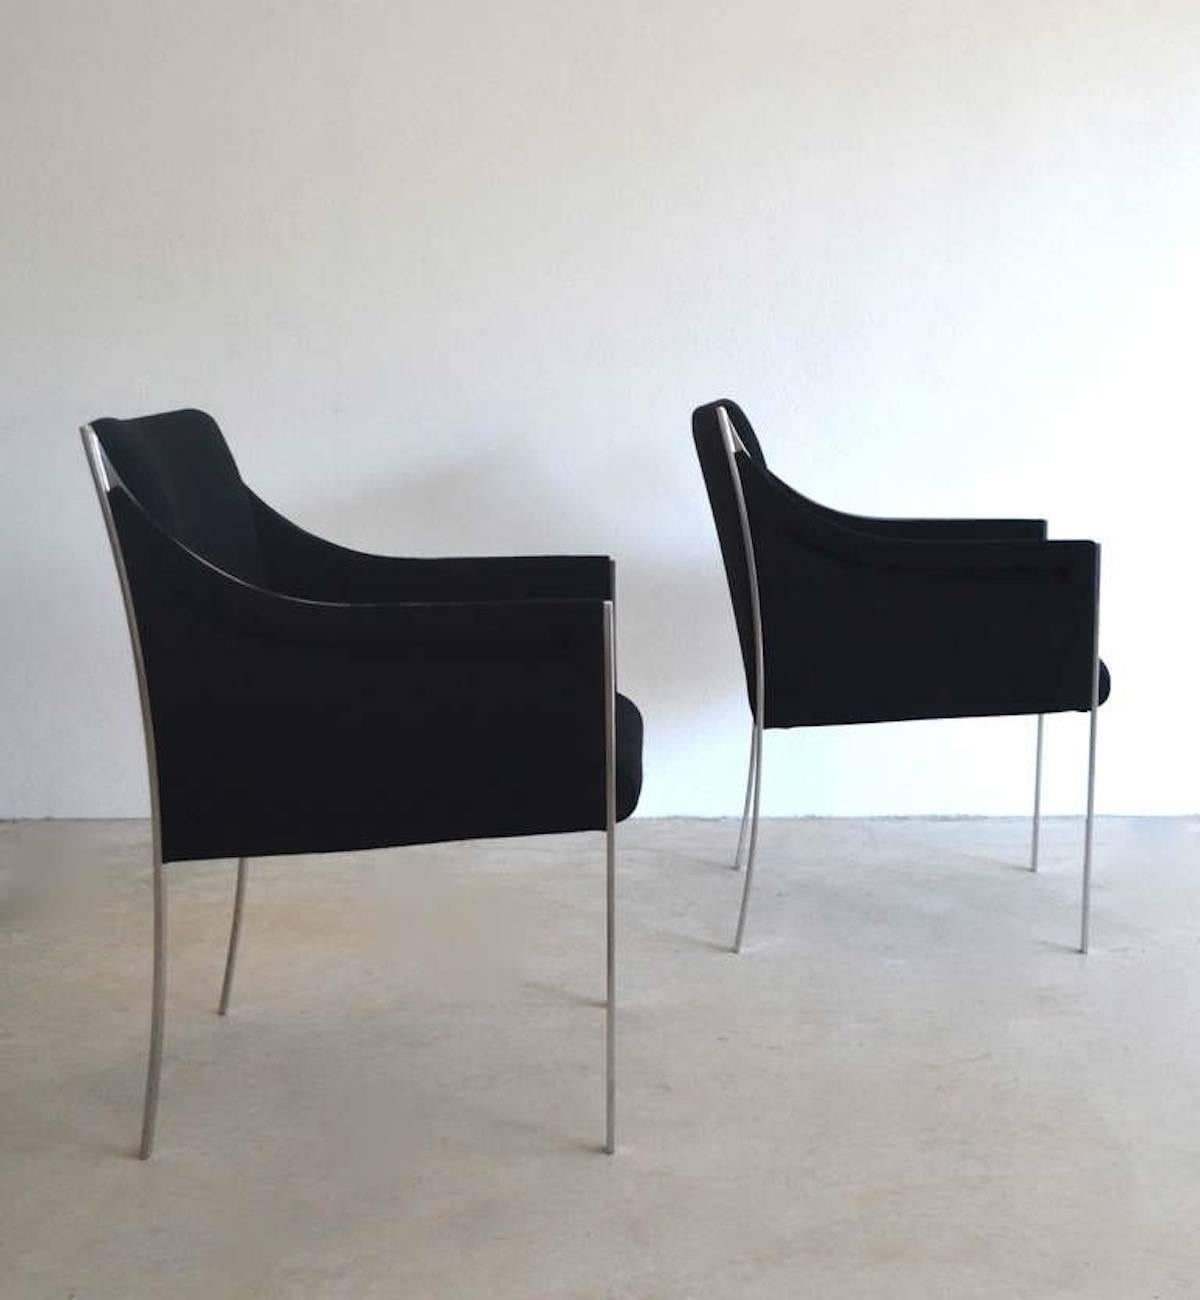 Pair of Midcentury Occasional Chairs or Lounge Chairs by Jens Risom (Moderne der Mitte des Jahrhunderts)